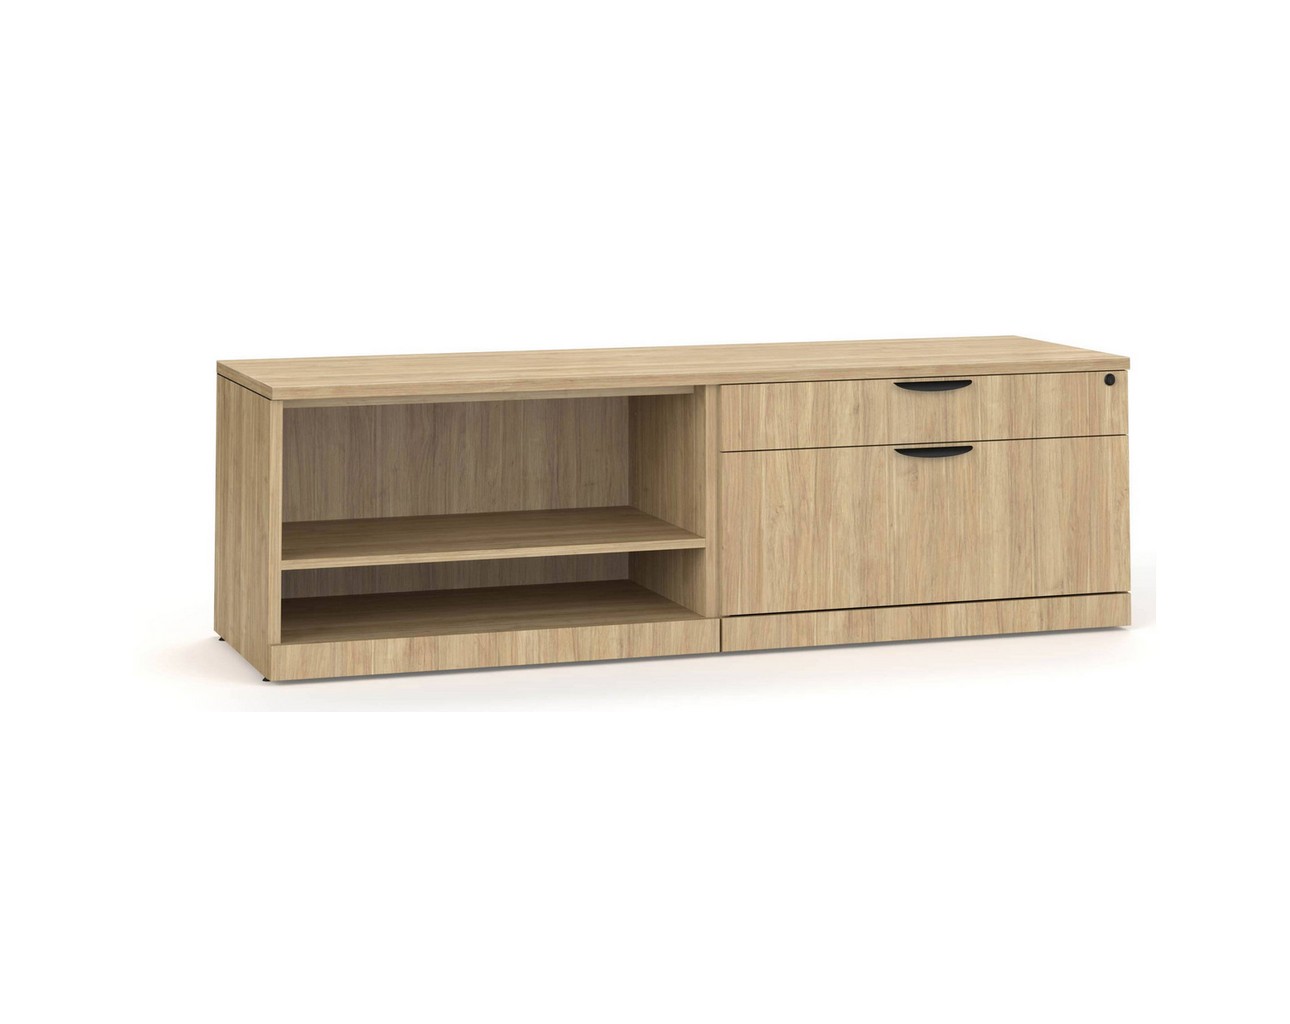 Elements Storage Cabinet and Bookshelf Credenza – APN and Top